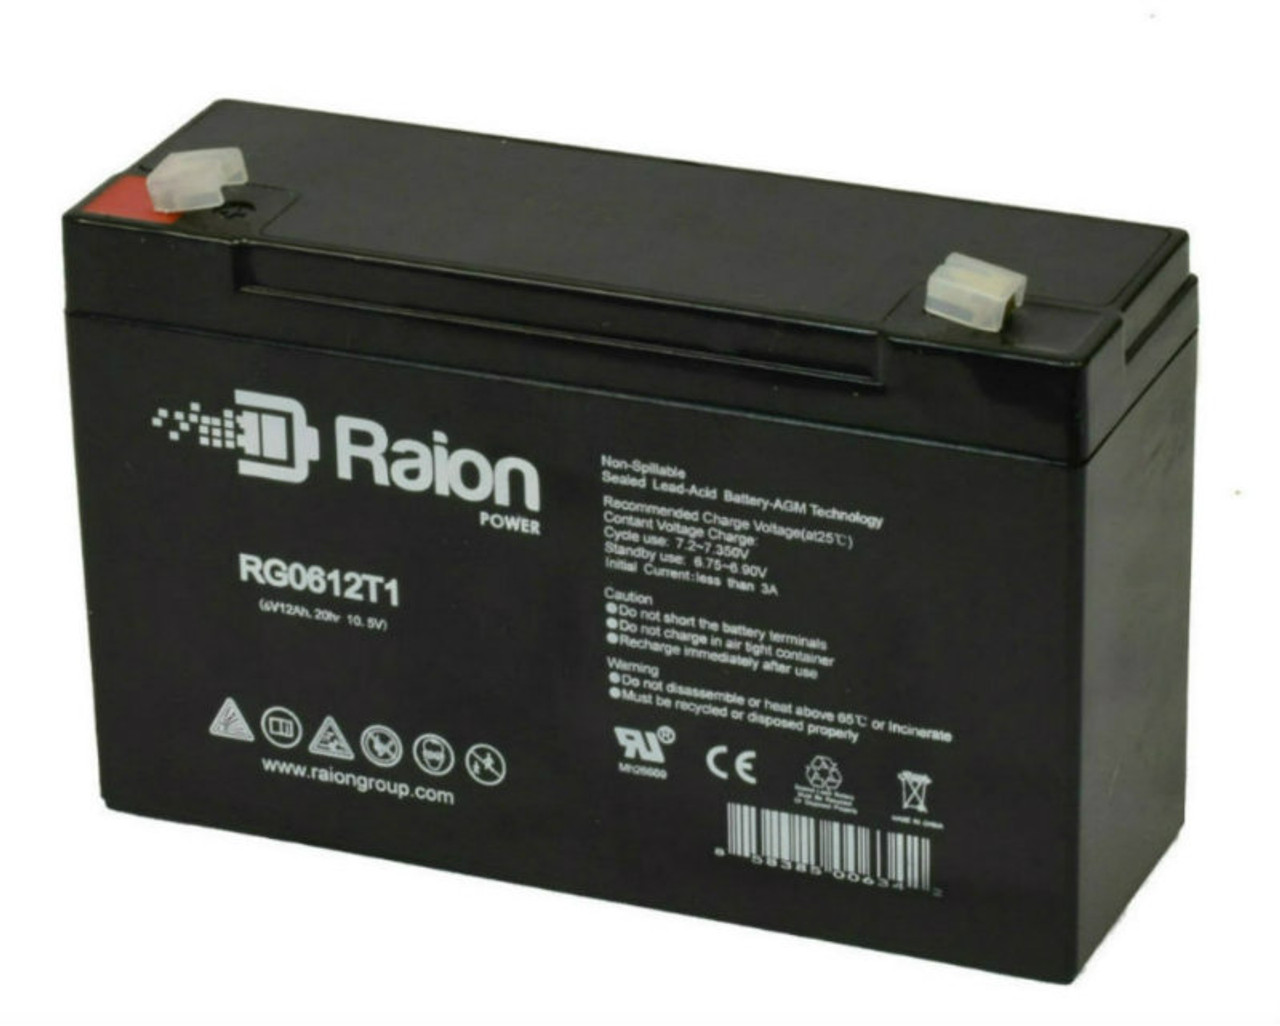 Raion Power RG06120T1 Replacement Battery for Newmox FNC-6100